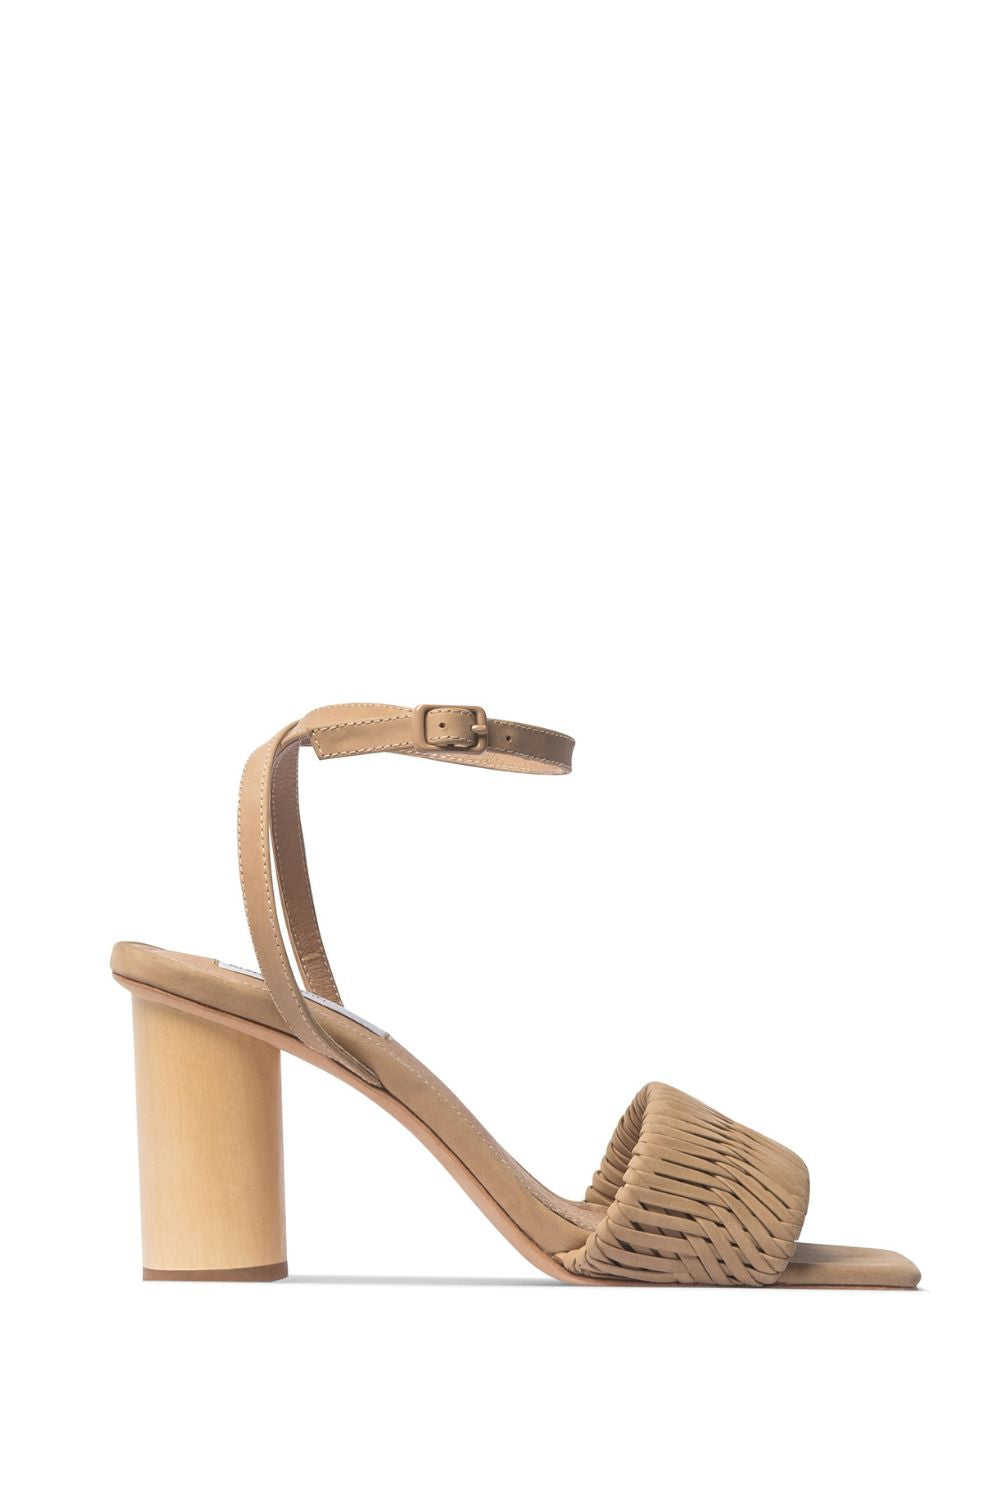 beige, heel, wooden heel, woven strap, leather, square toe, product image